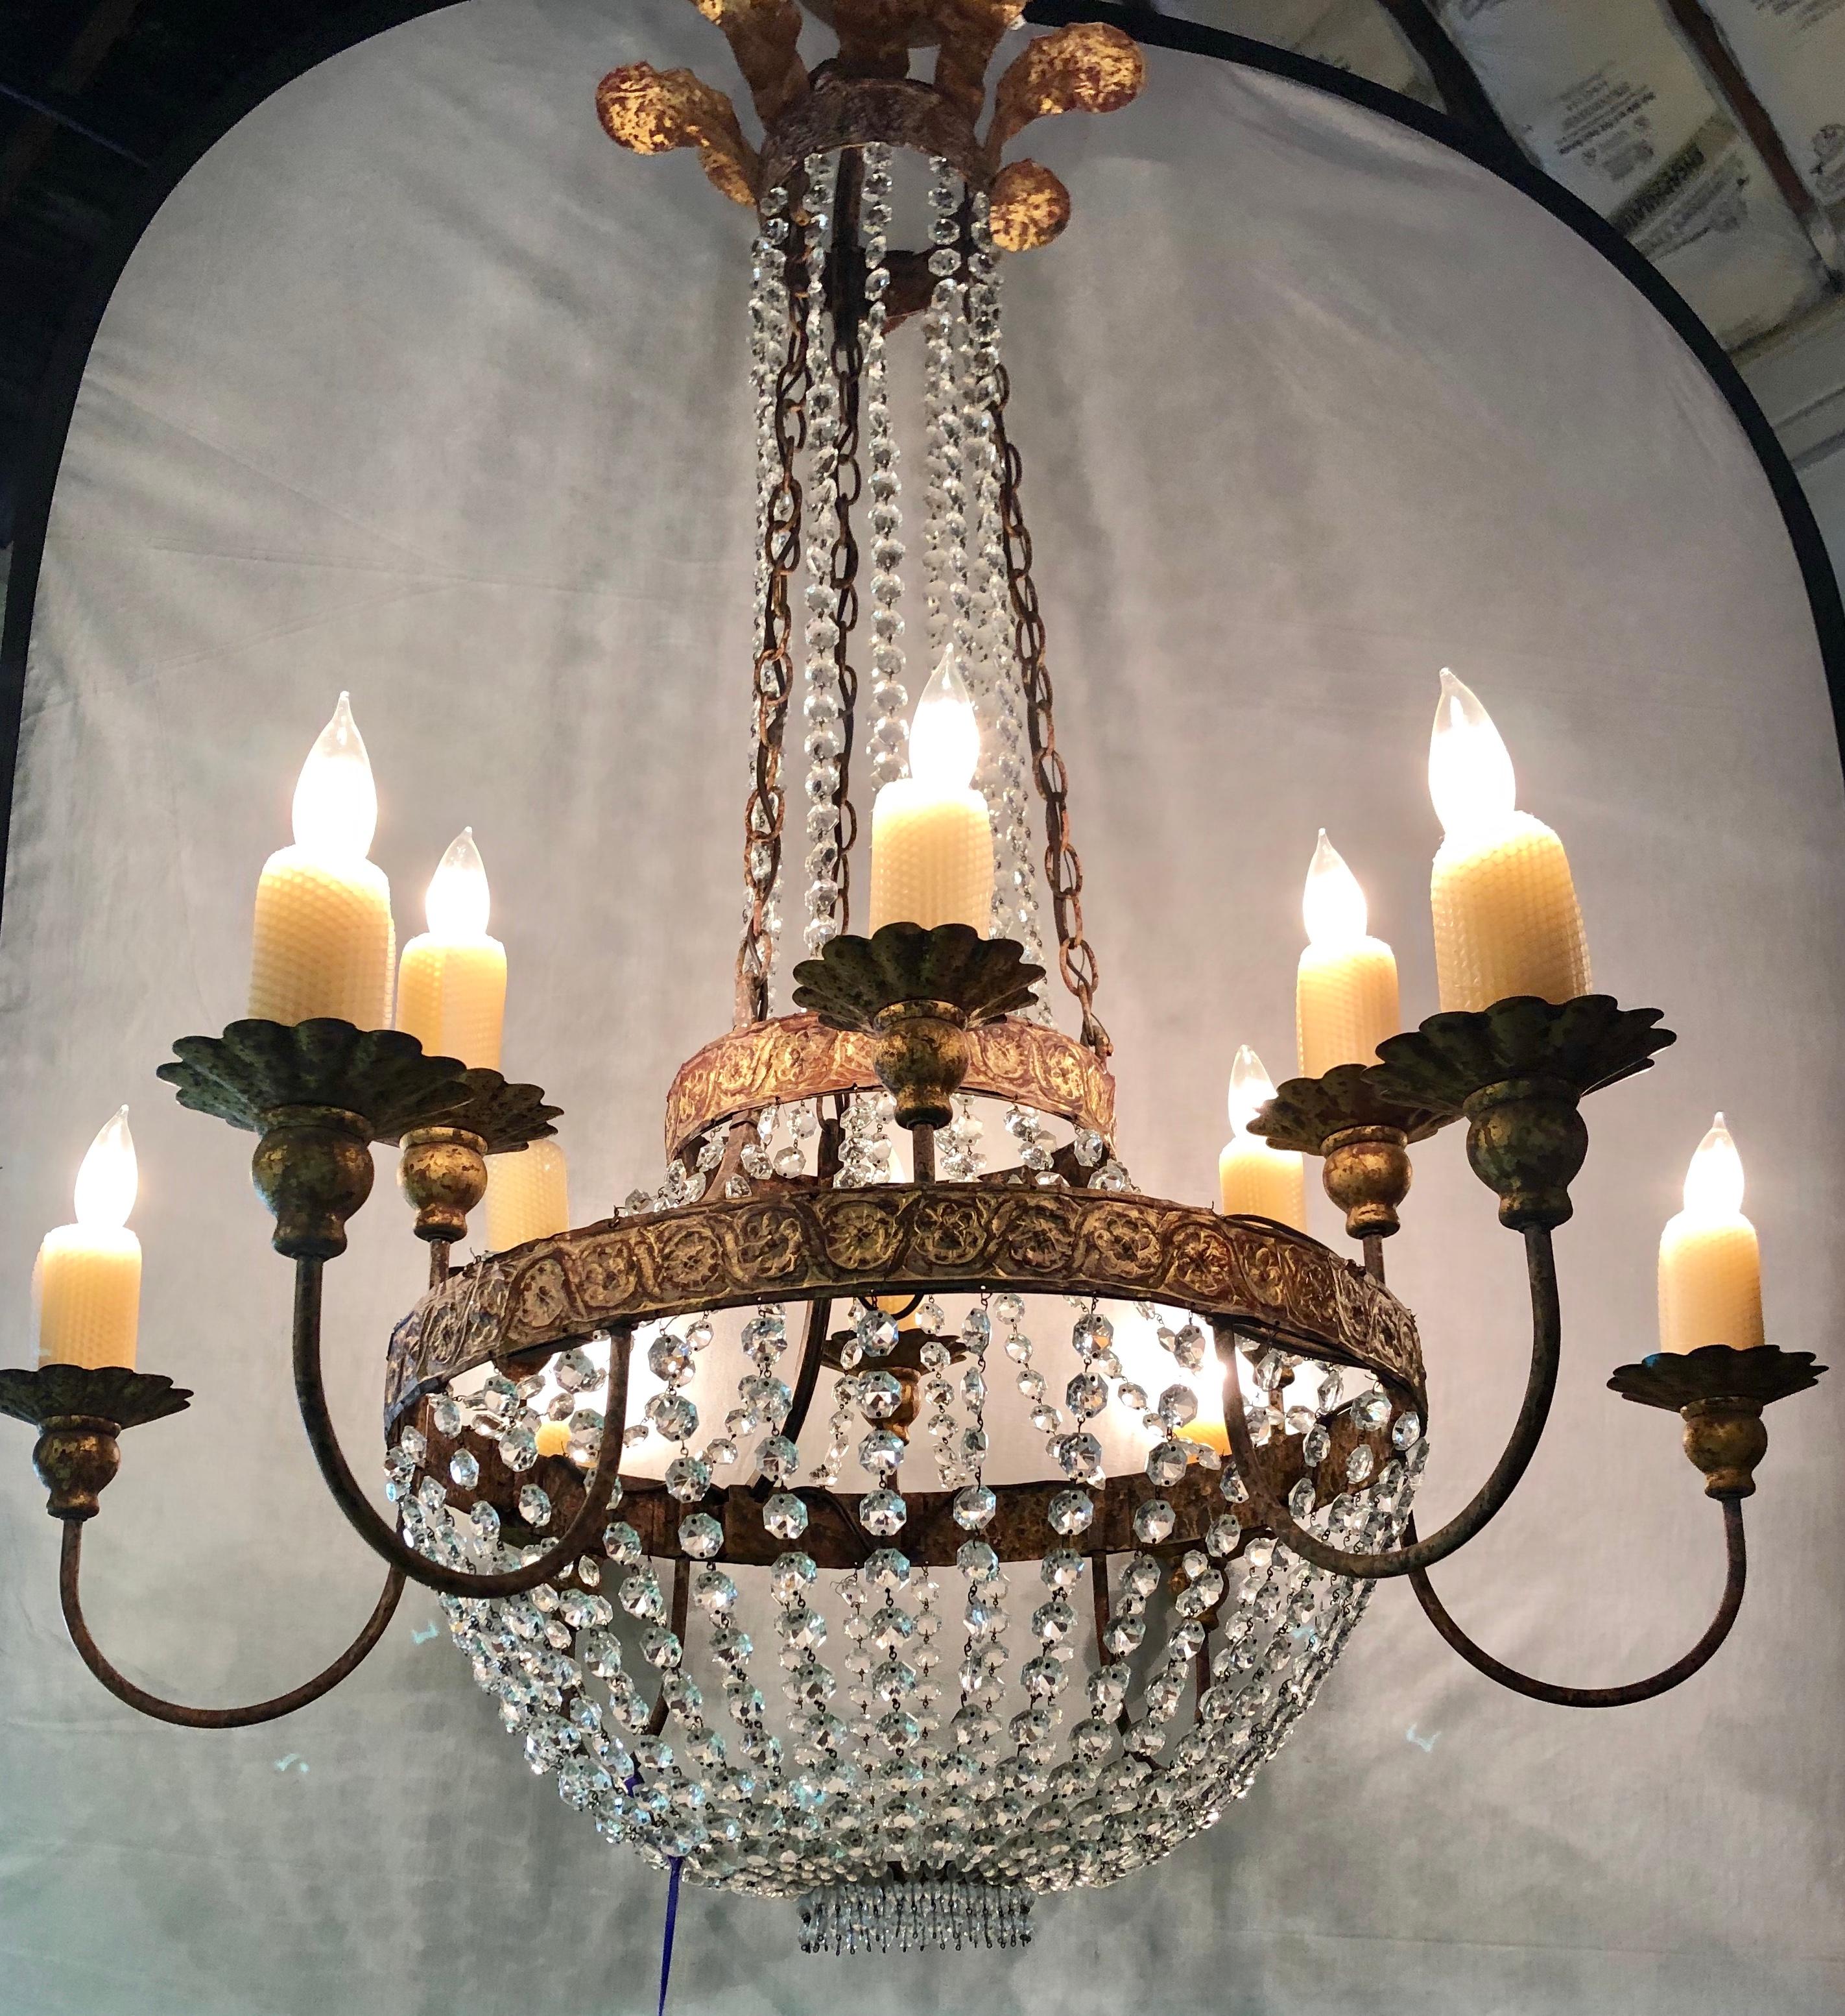 Niermann weeks crystal and bronze campaign chandelier having twelve lights. Fine antique gild and polychrome decorated. As seen priced on the Weeks website, $16,000.